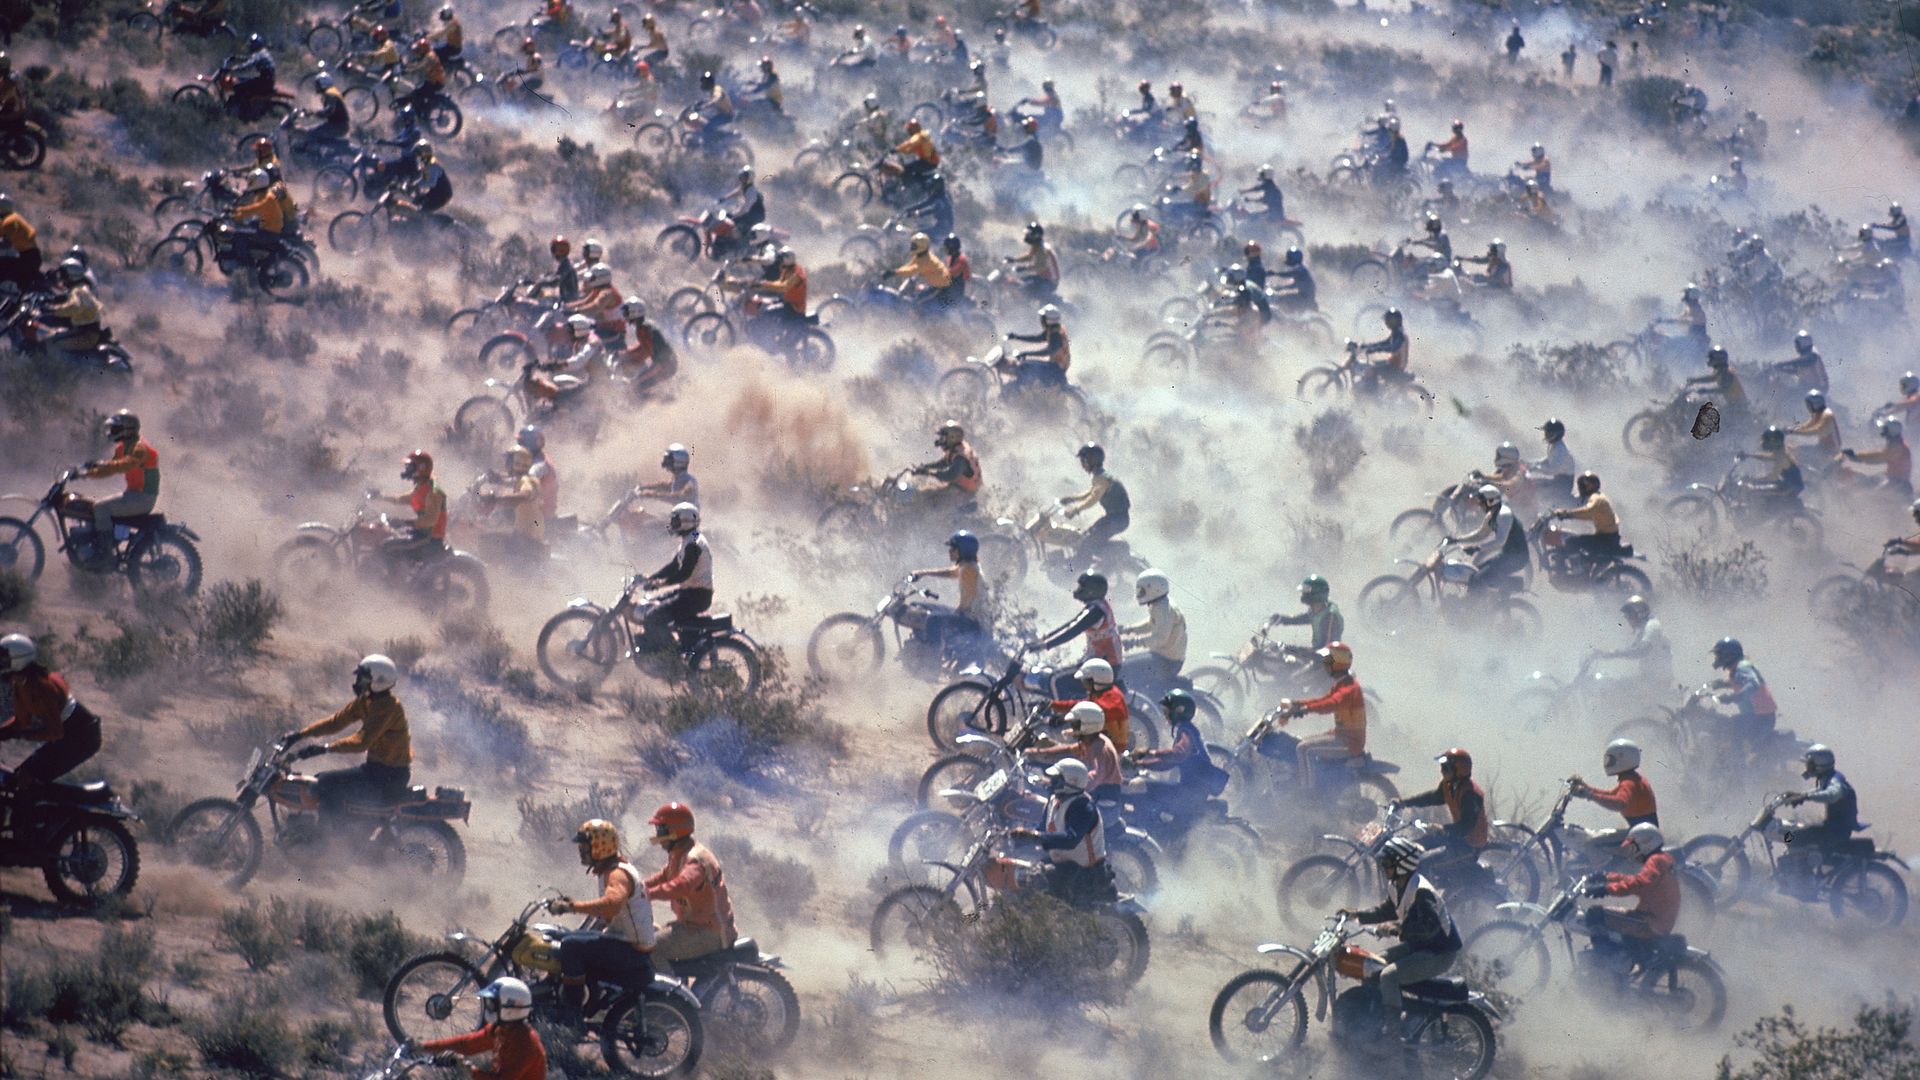 A flurry of motorcycles, racing